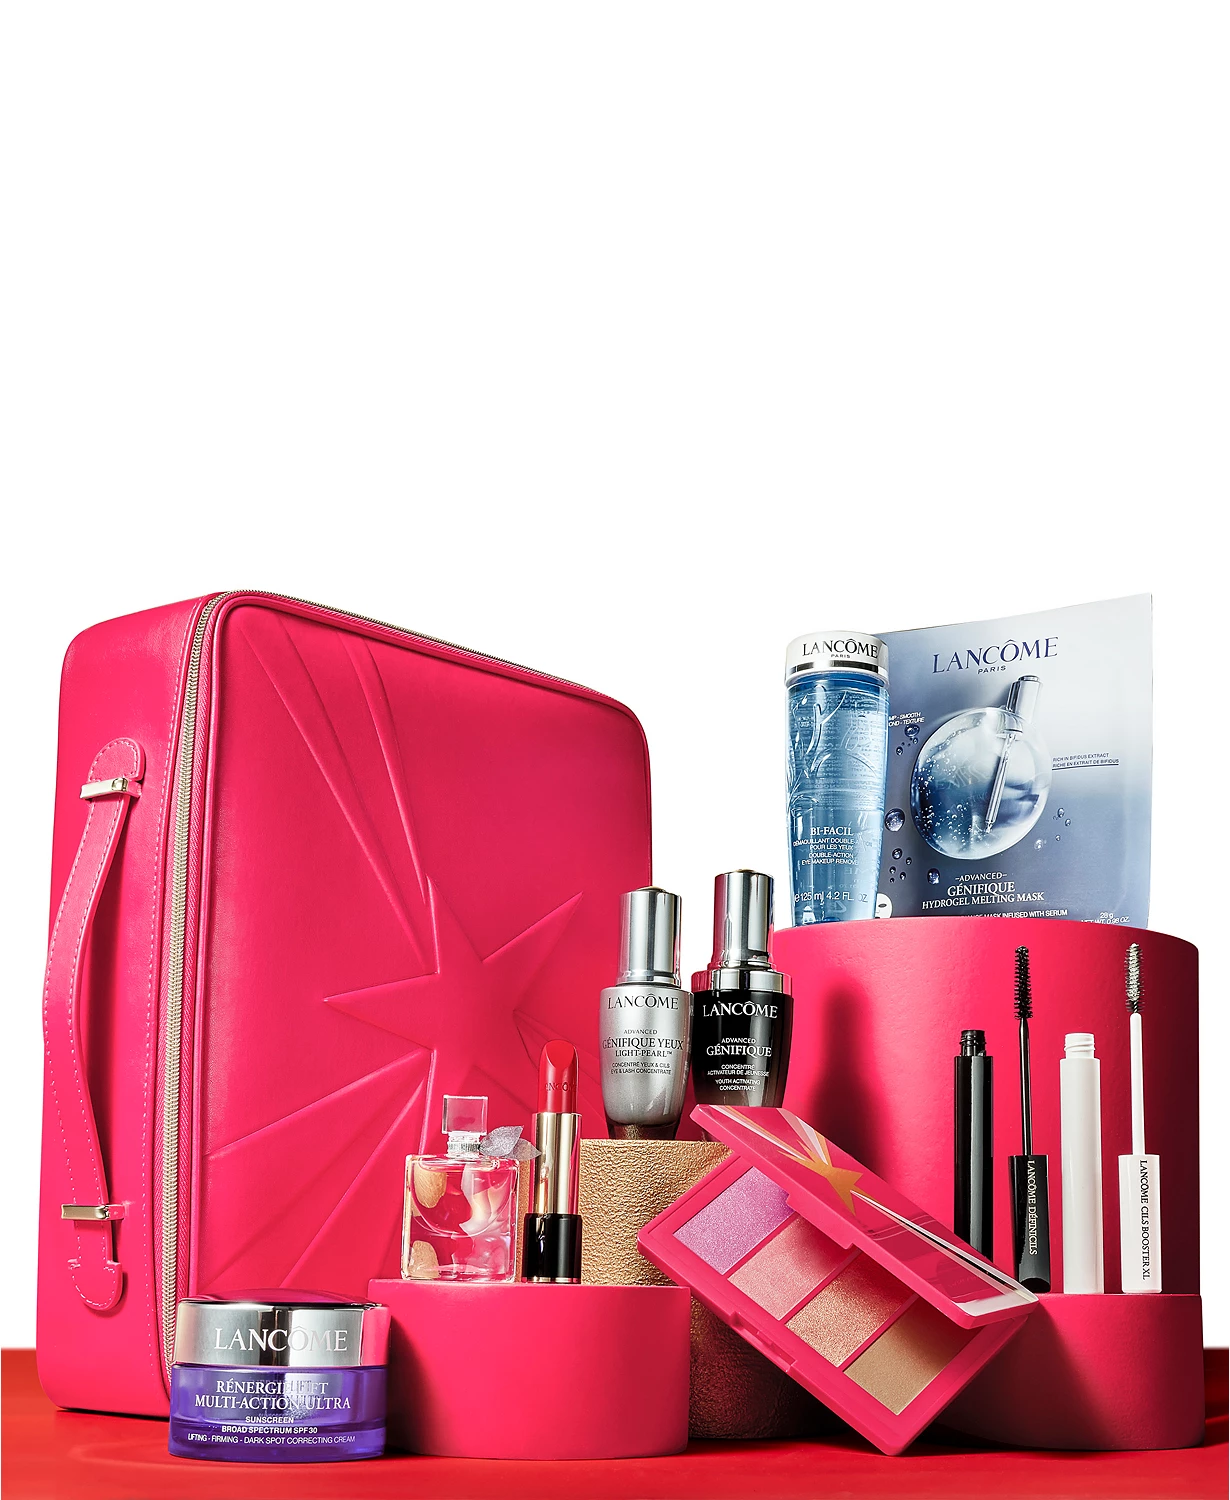 Lancôme Beauty Box Featuring 9 Full Size Favorites for $75